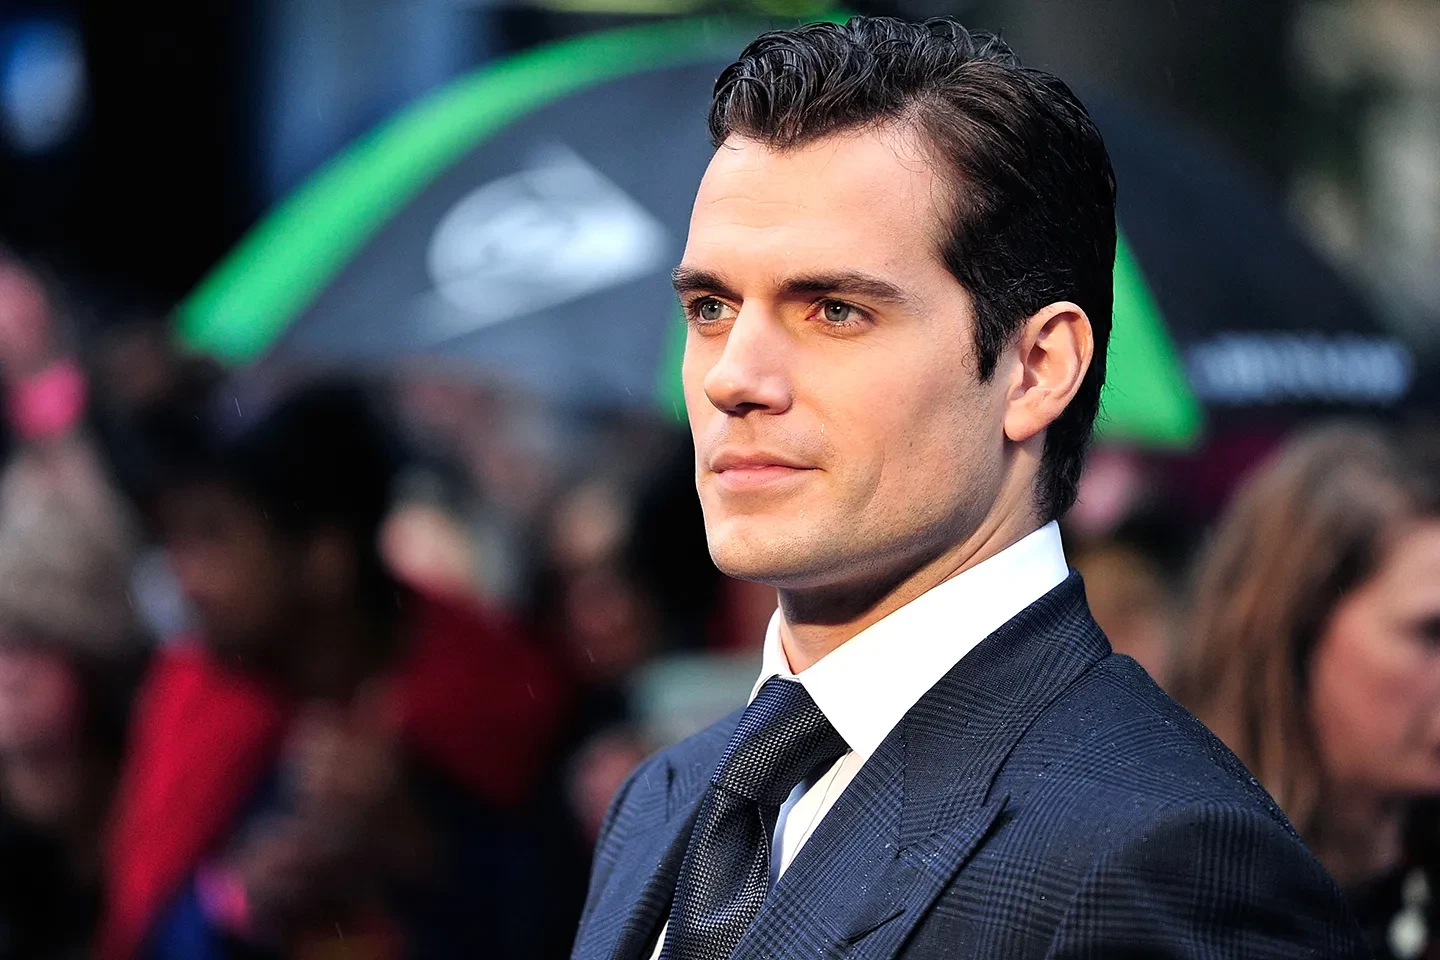 Henry Cavill was once too chubby for leading roles